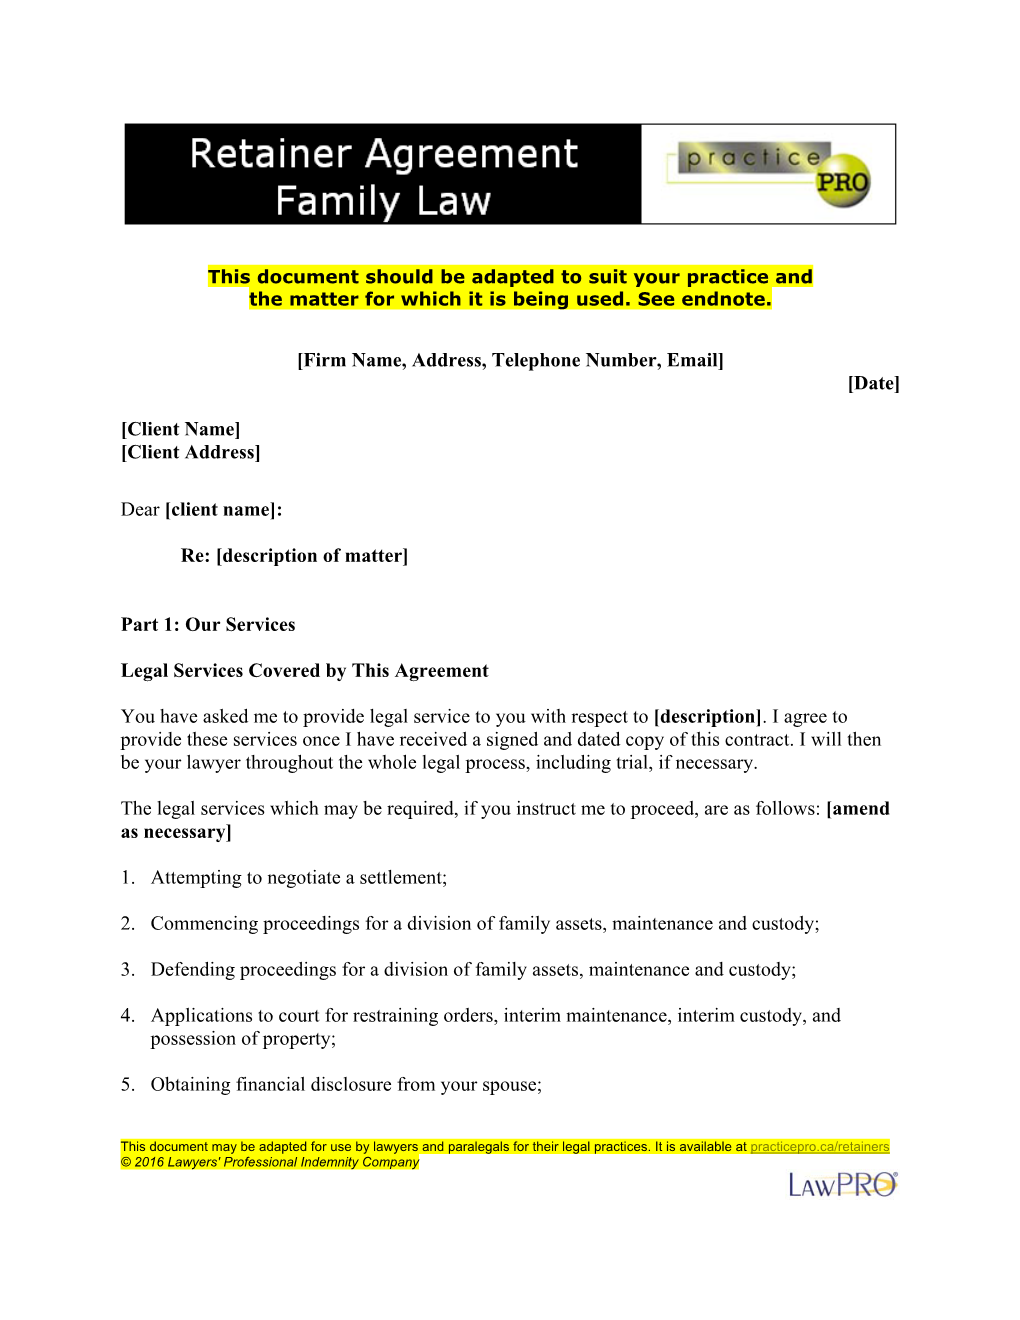 Retainer Agreement Family Law